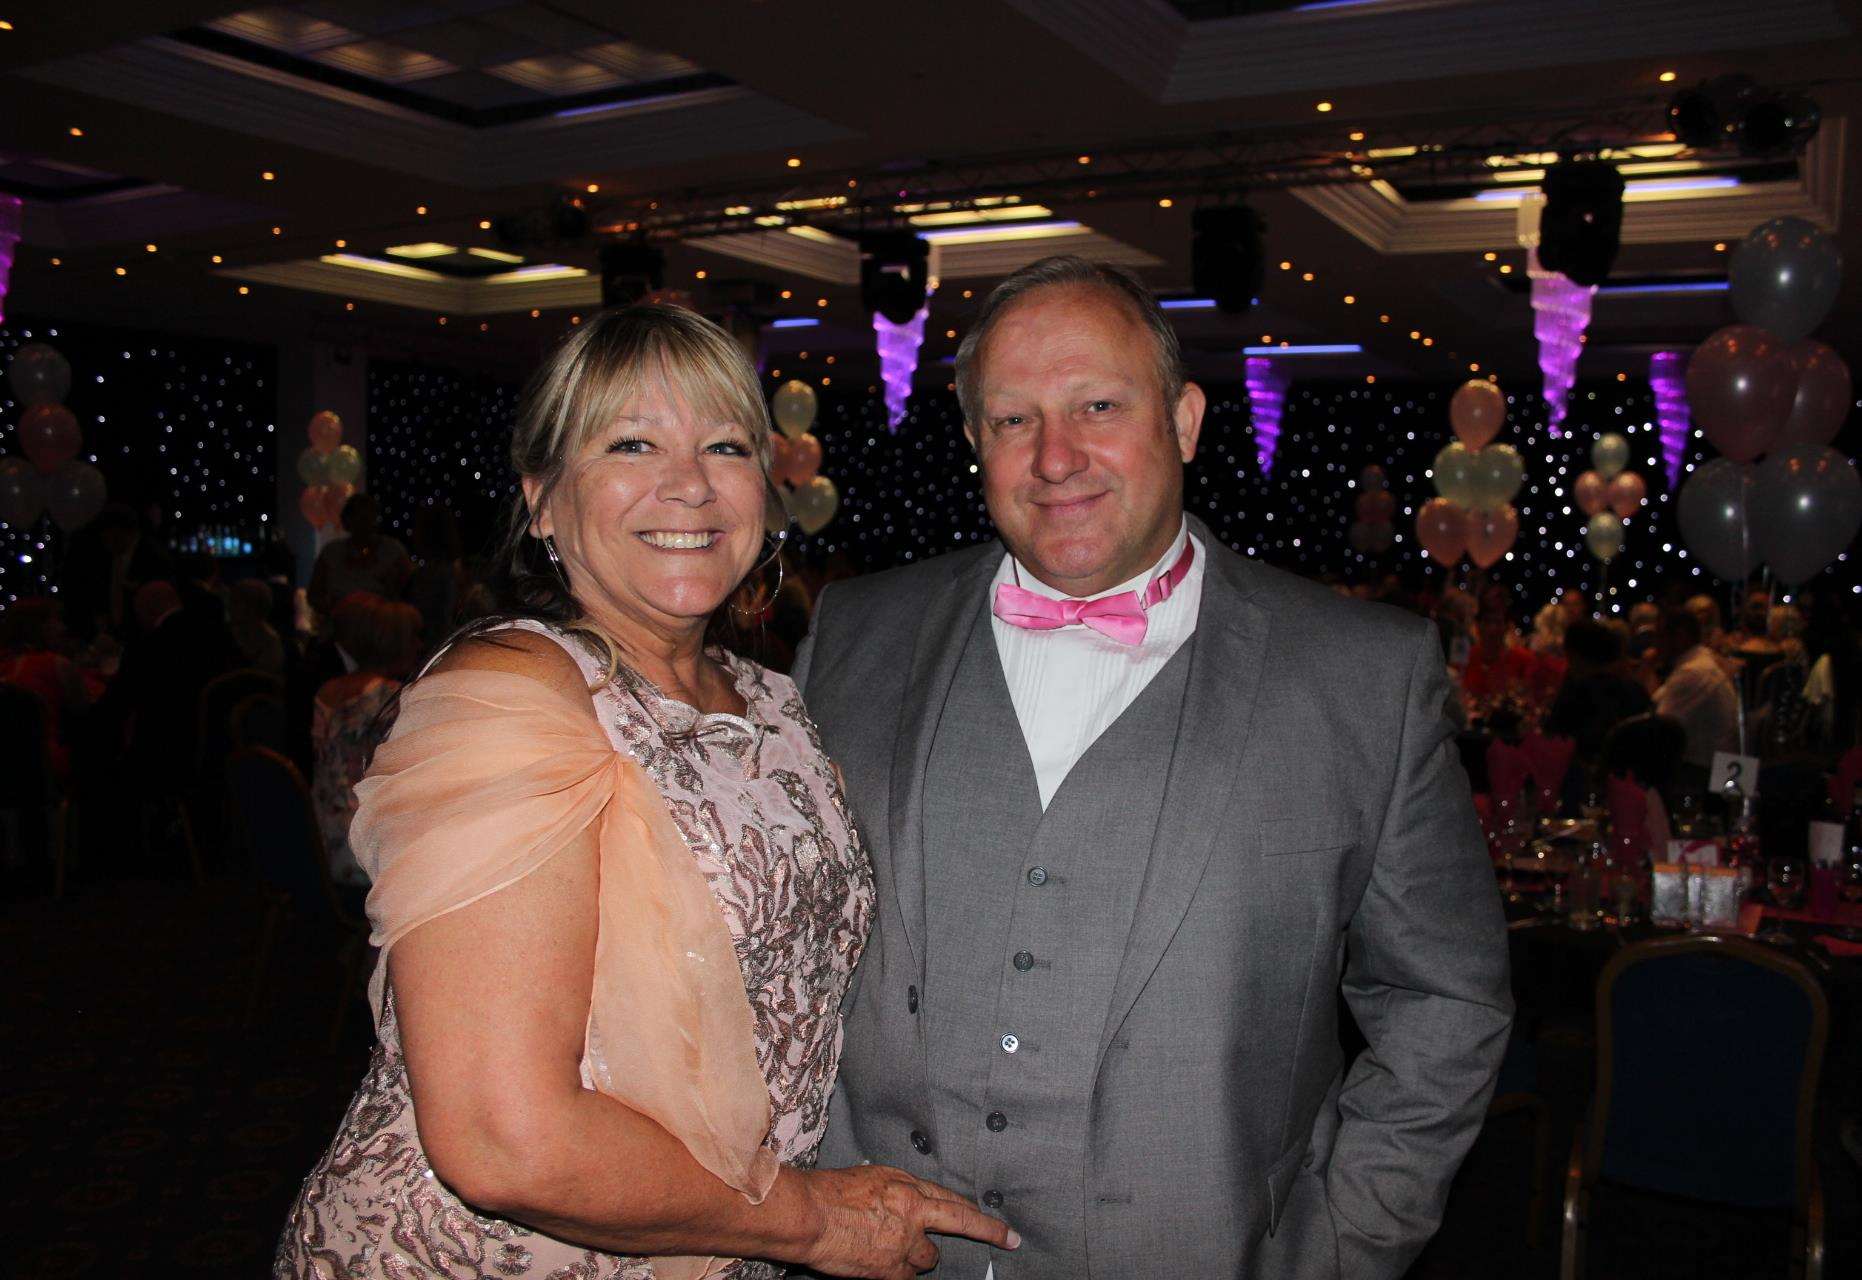 Sheppey Couple S Pink Tie Charity Ball Raises £10 000 For Cancer Research